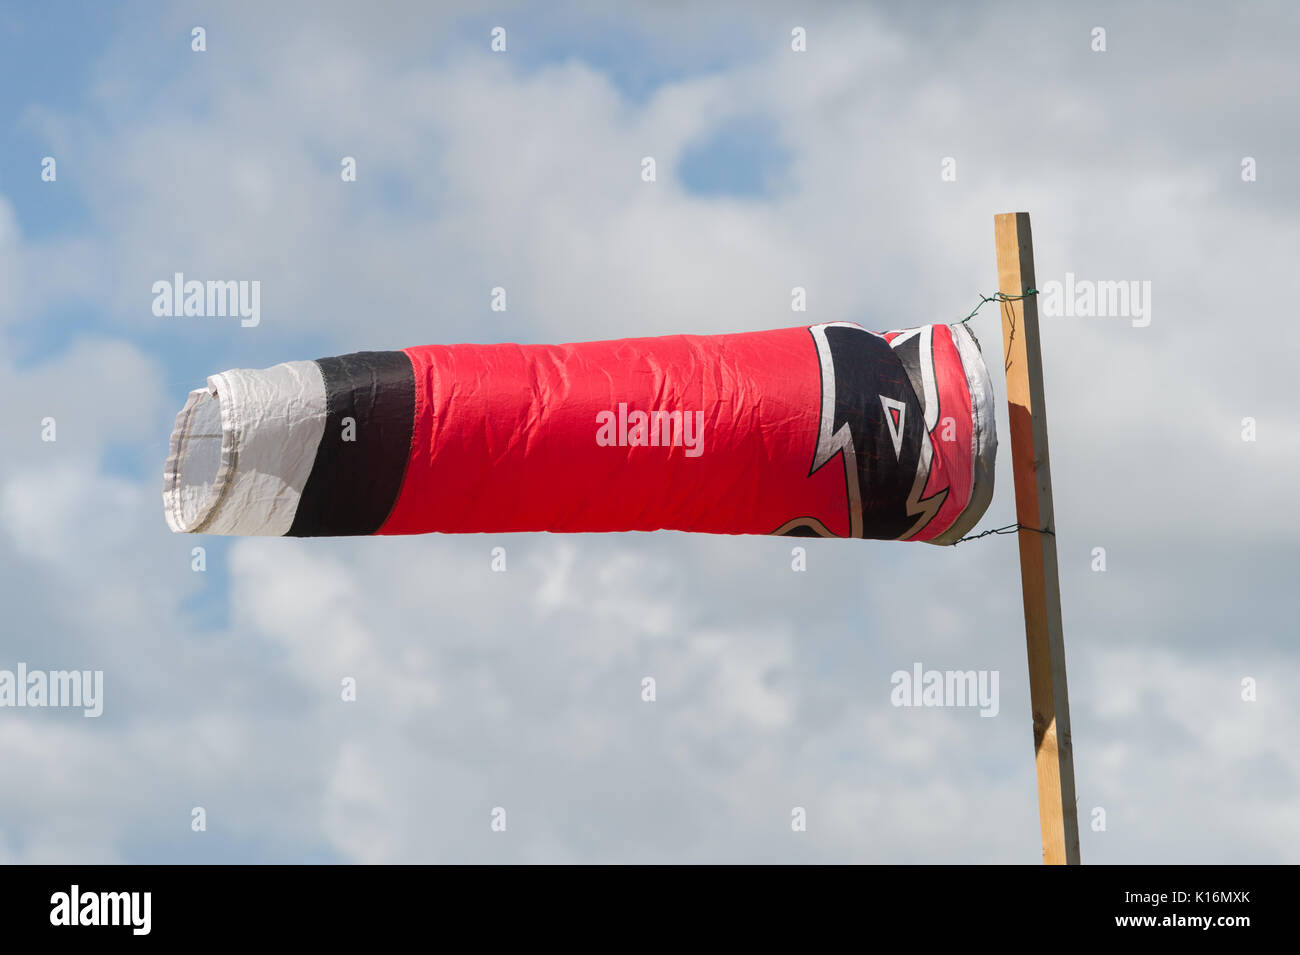 Windsock blowing in the wind in front of tropical landcape in Martinique, Caribbean Sea Stock Photo